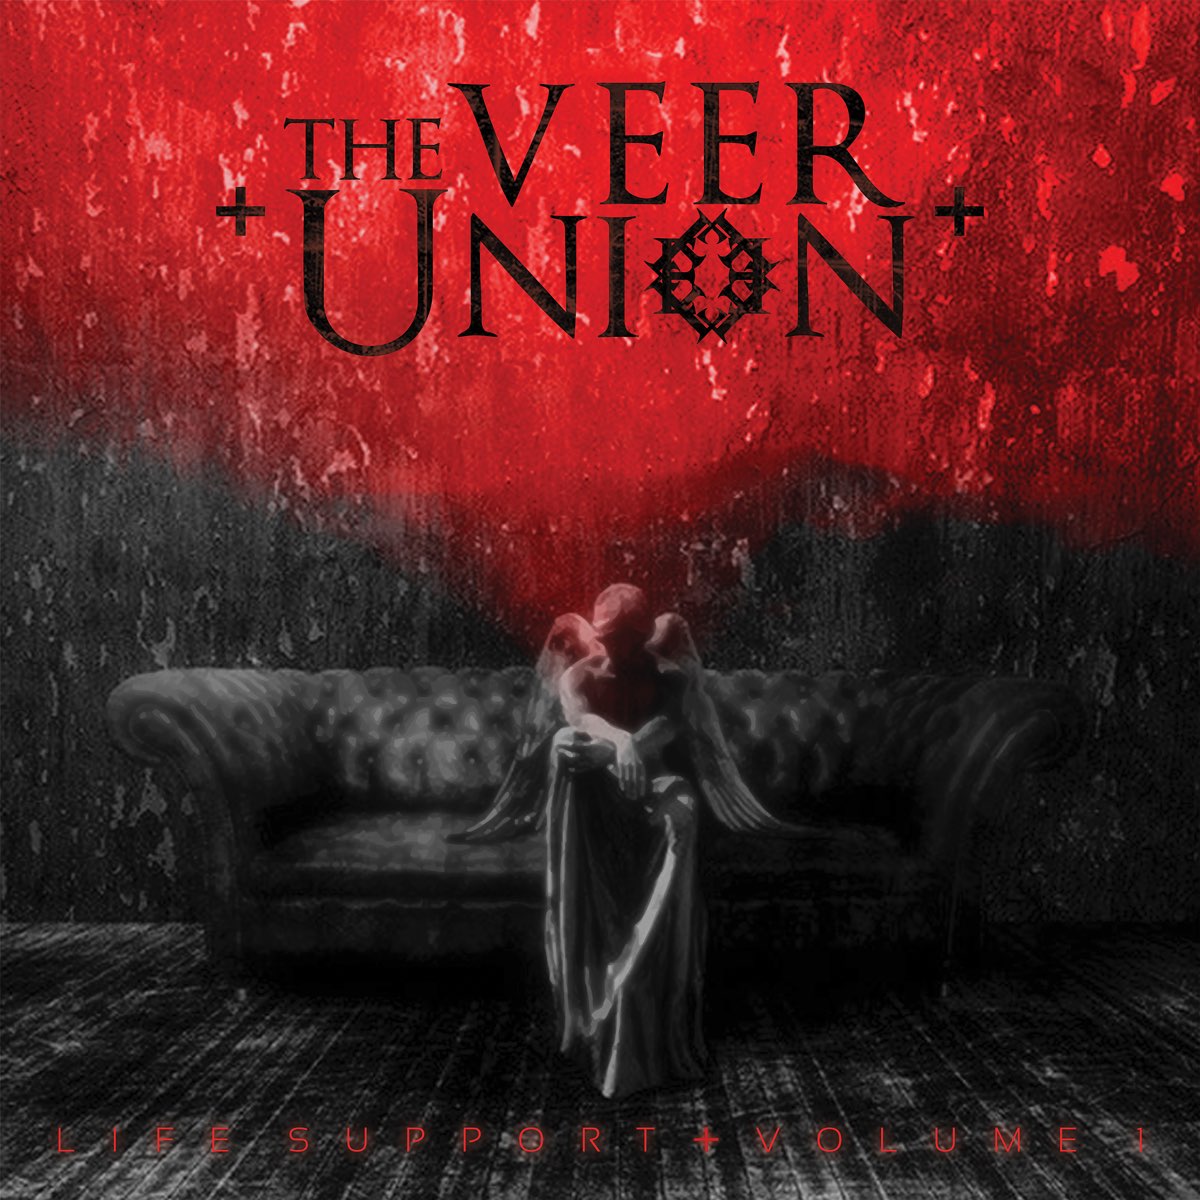 The veer union. The Veer Union Life support Vol. 1. The Veer Union фото. Escape the Veer Union.